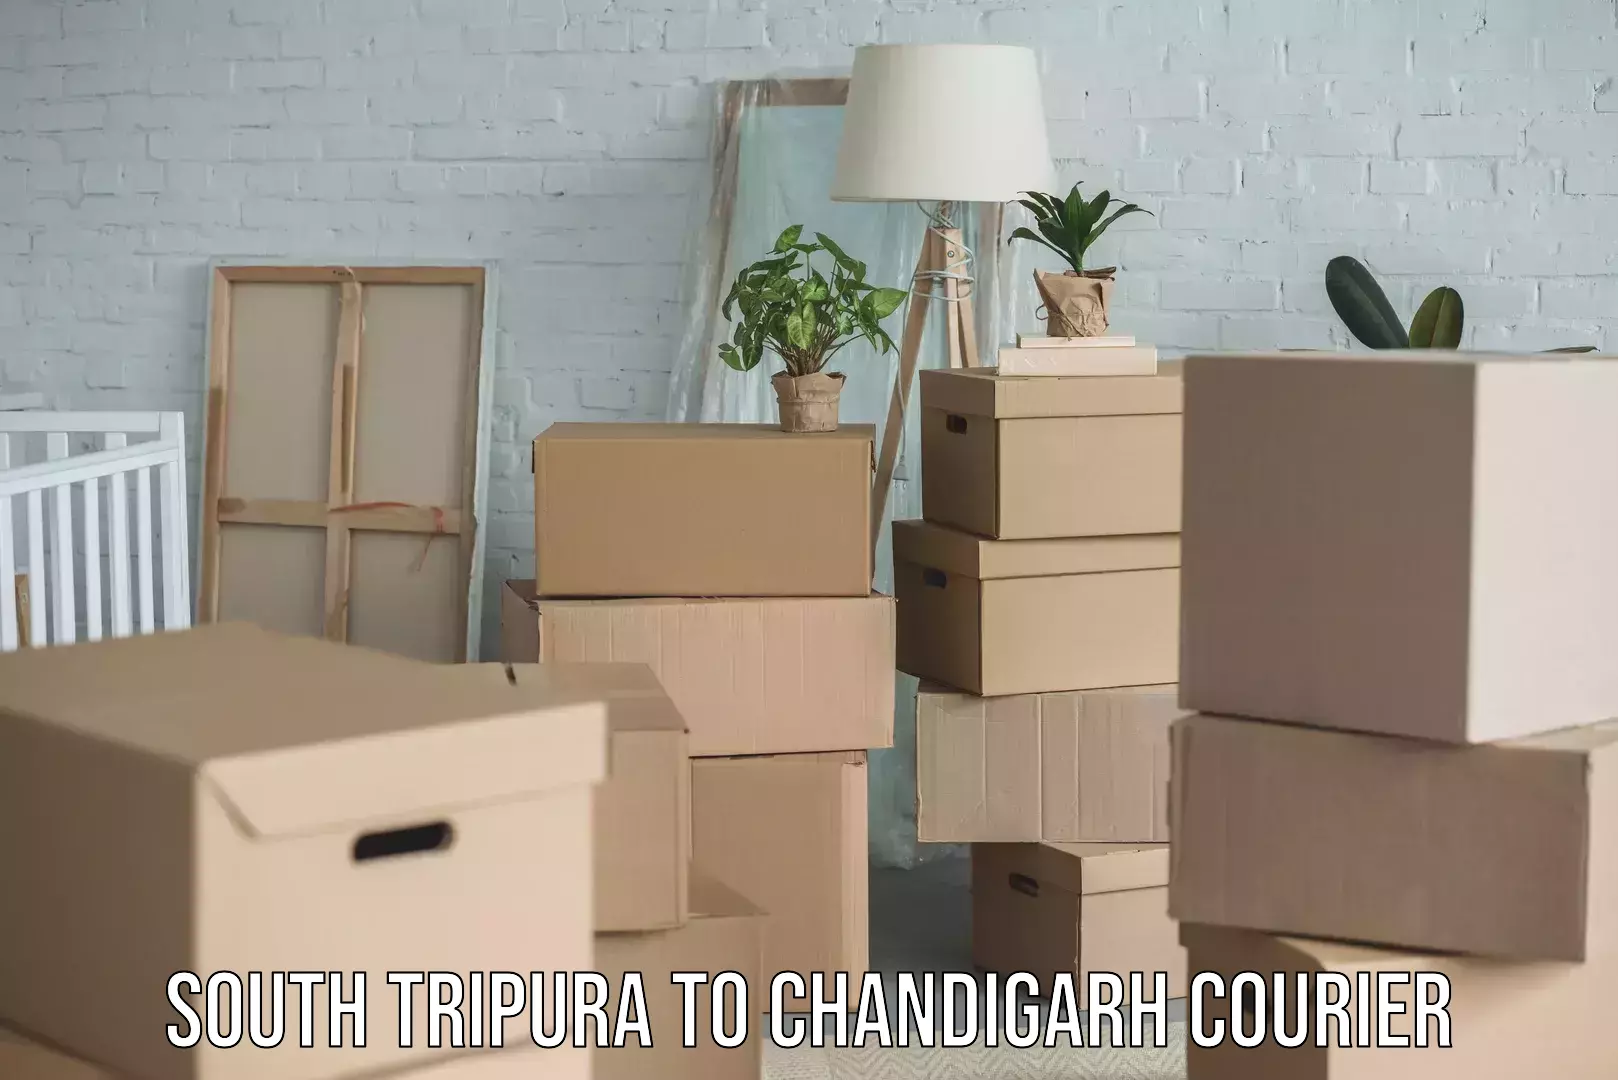 Business delivery service South Tripura to Chandigarh